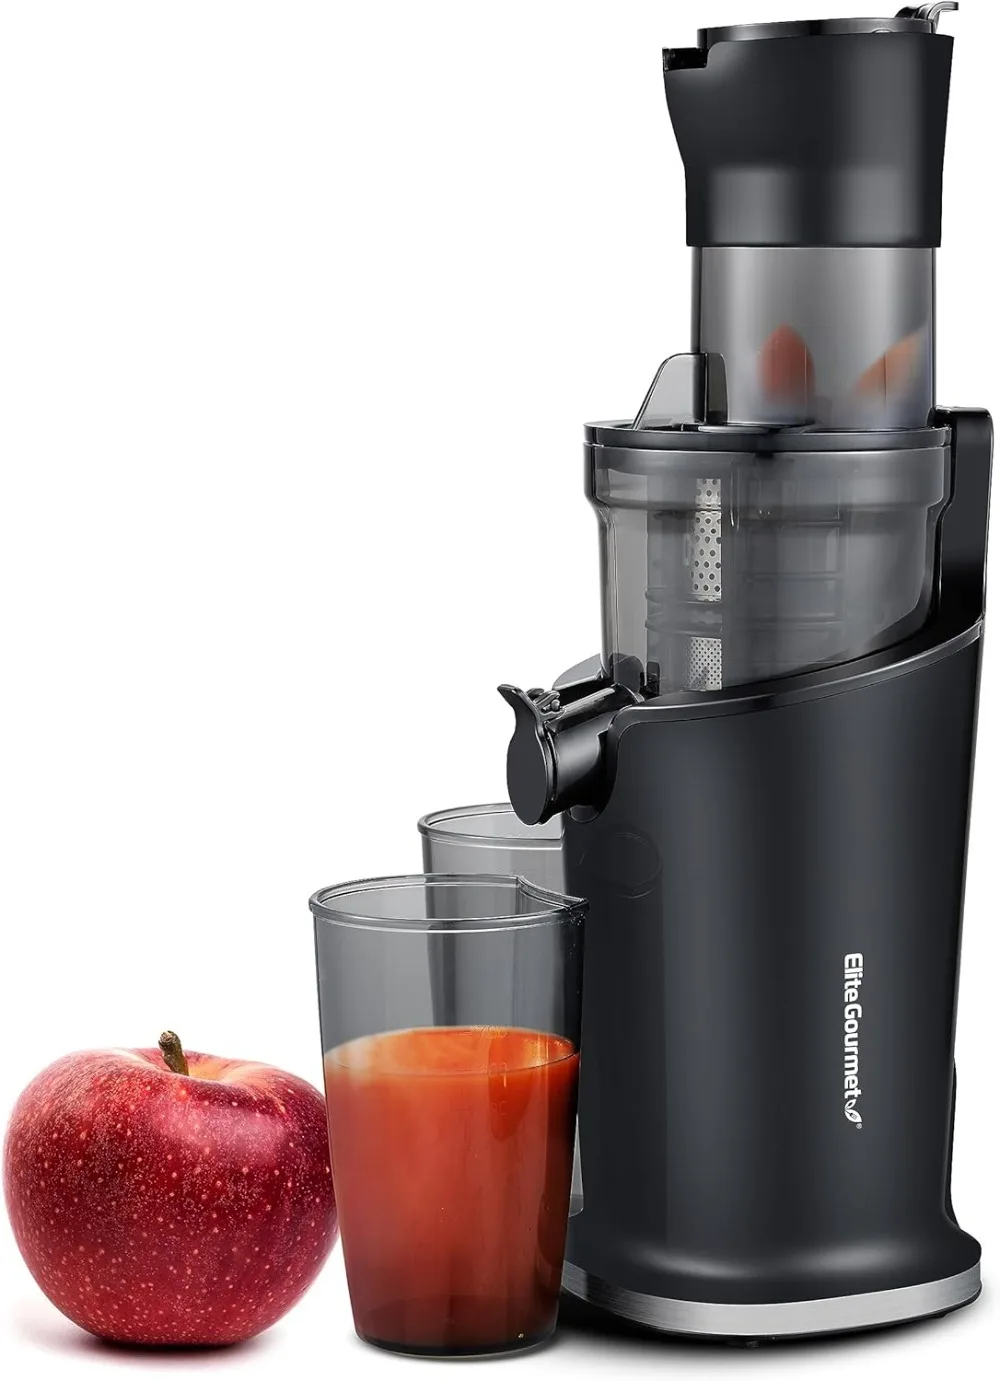 https://ae01.alicdn.com/kf/S9c7f097f6e7e419697e4c3f323054e65X/Elite-Gourmet-EJX600-Compact-Small-Space-Saving-Masticating-Slow-Juicer-Cold-Press-Juice-Extractor-Nutrient-and.jpg